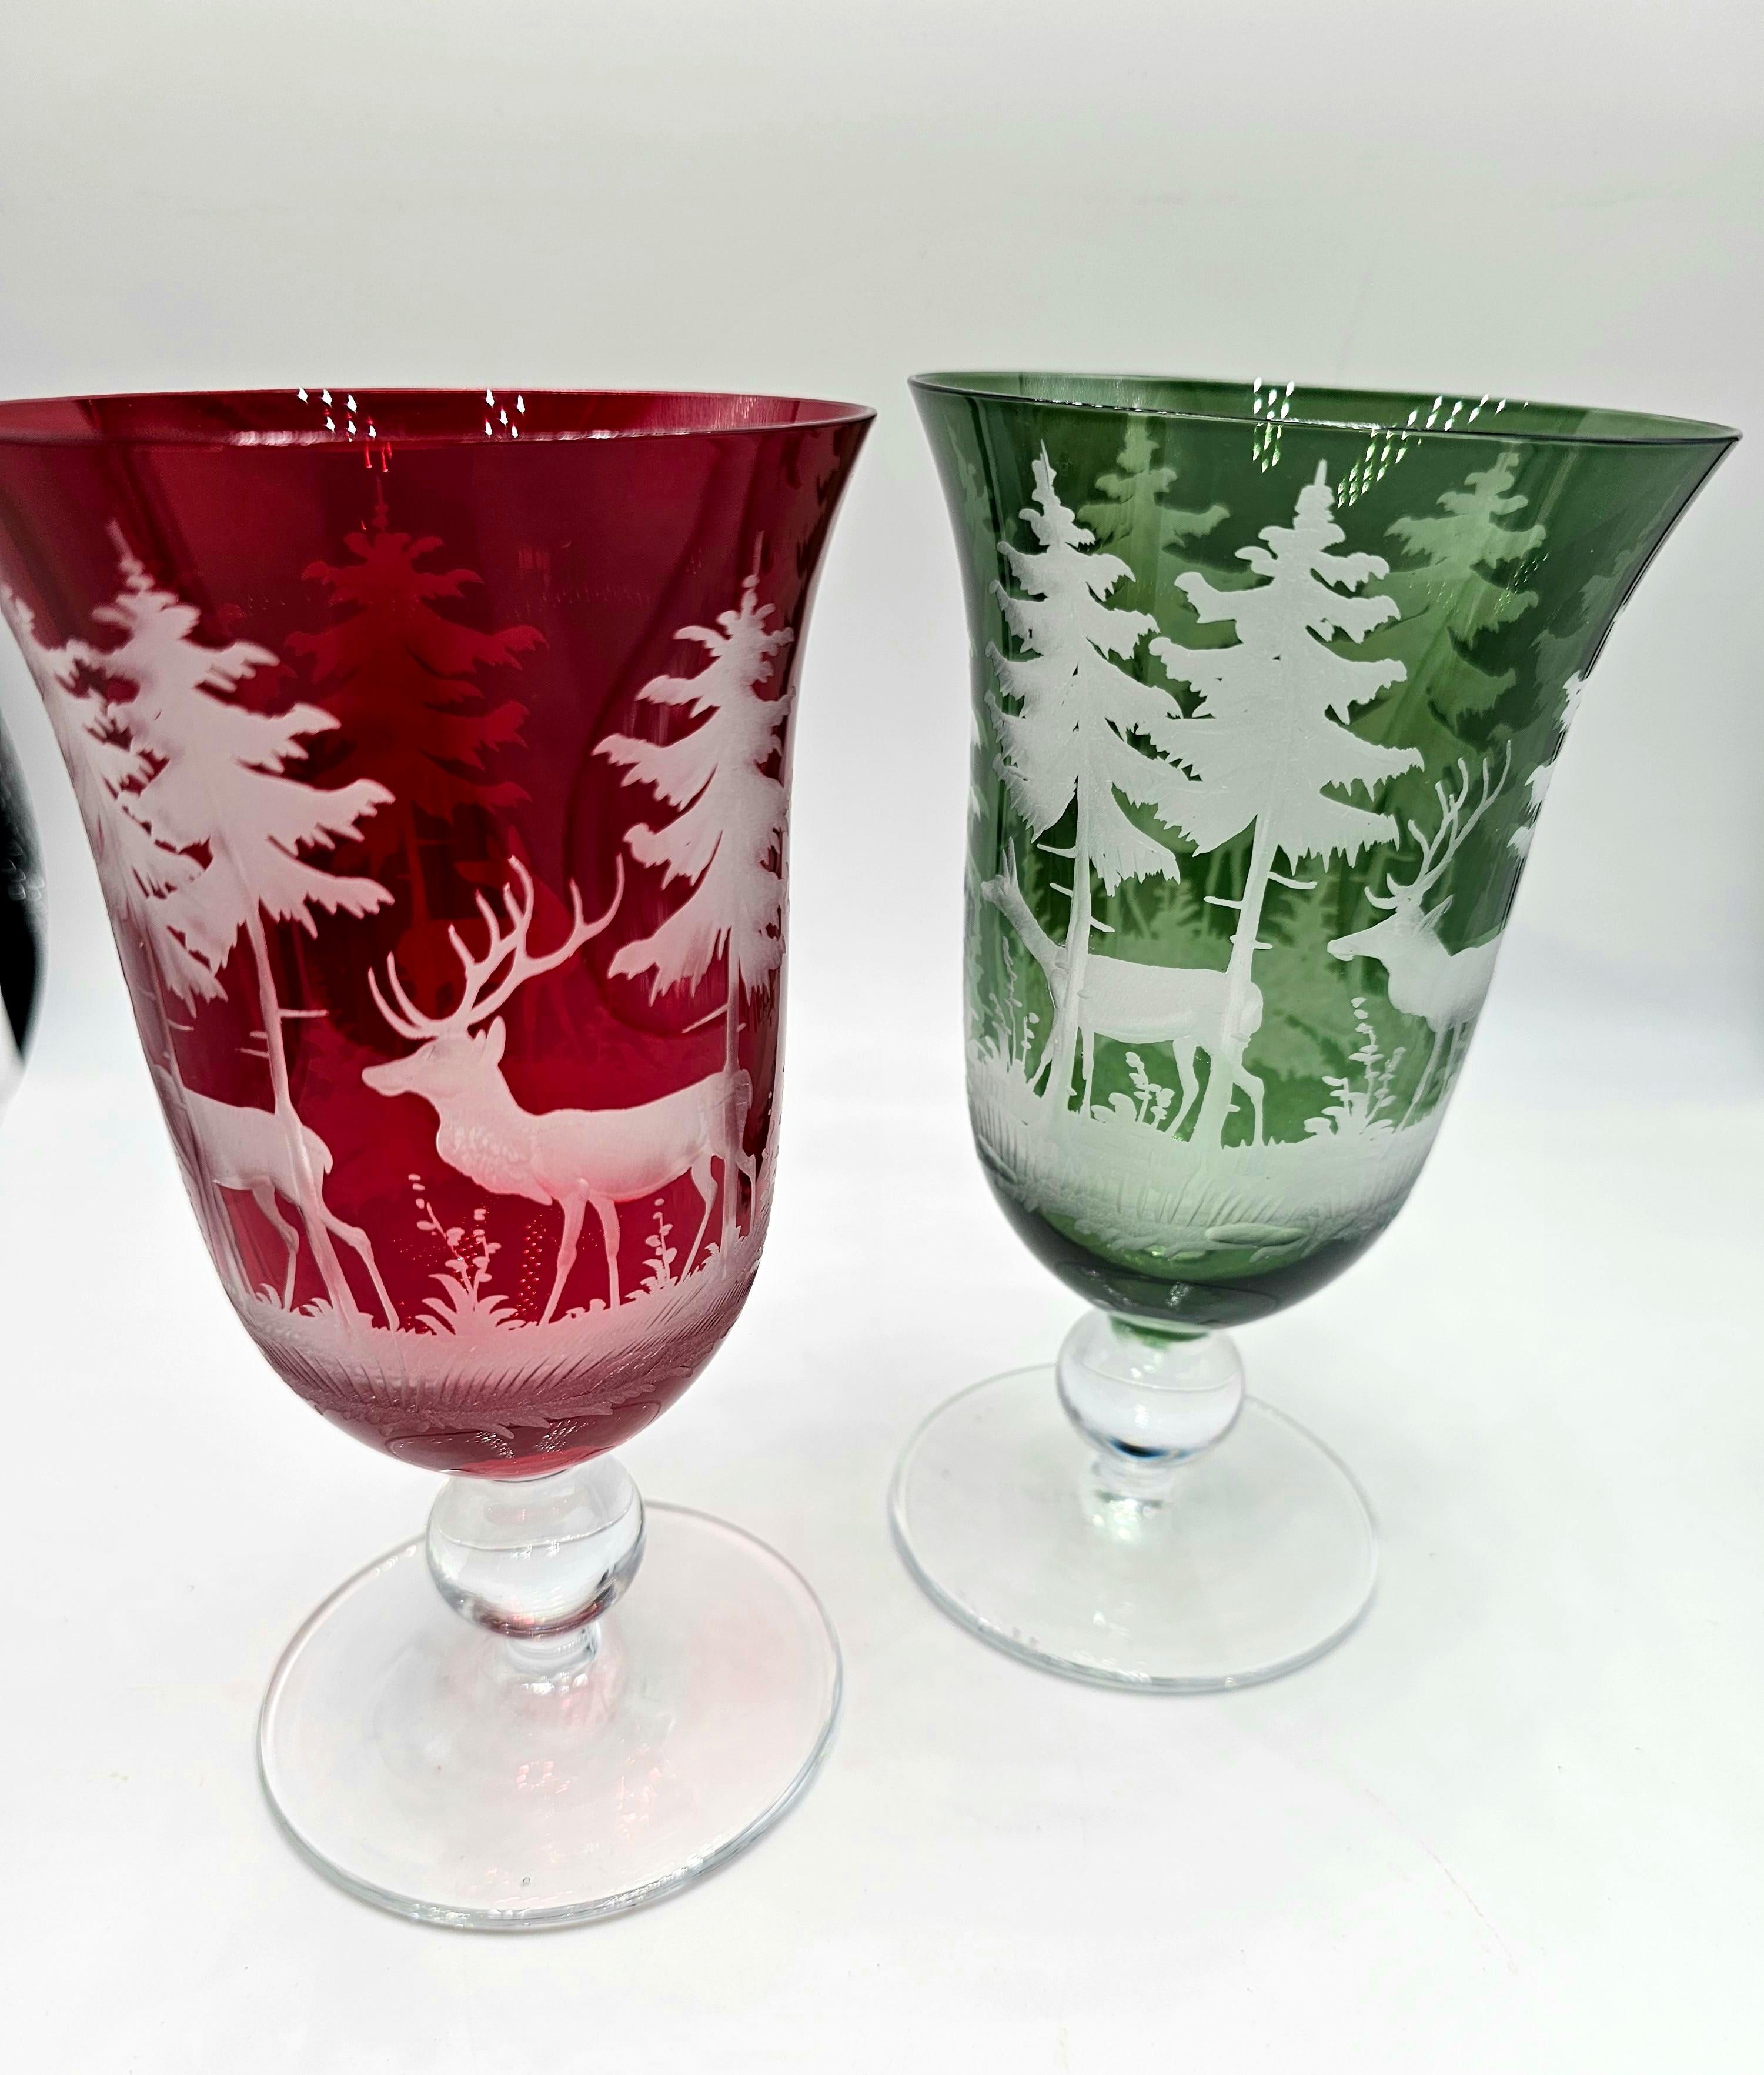 Set of six hand blown wine glasses in red crystal with a hand-edged black forest hunting scene all-around. The decor is an antique hunting scene from Bavaria showing deers, trees and bambis all-over the glass in the style of Black Forest. A glass